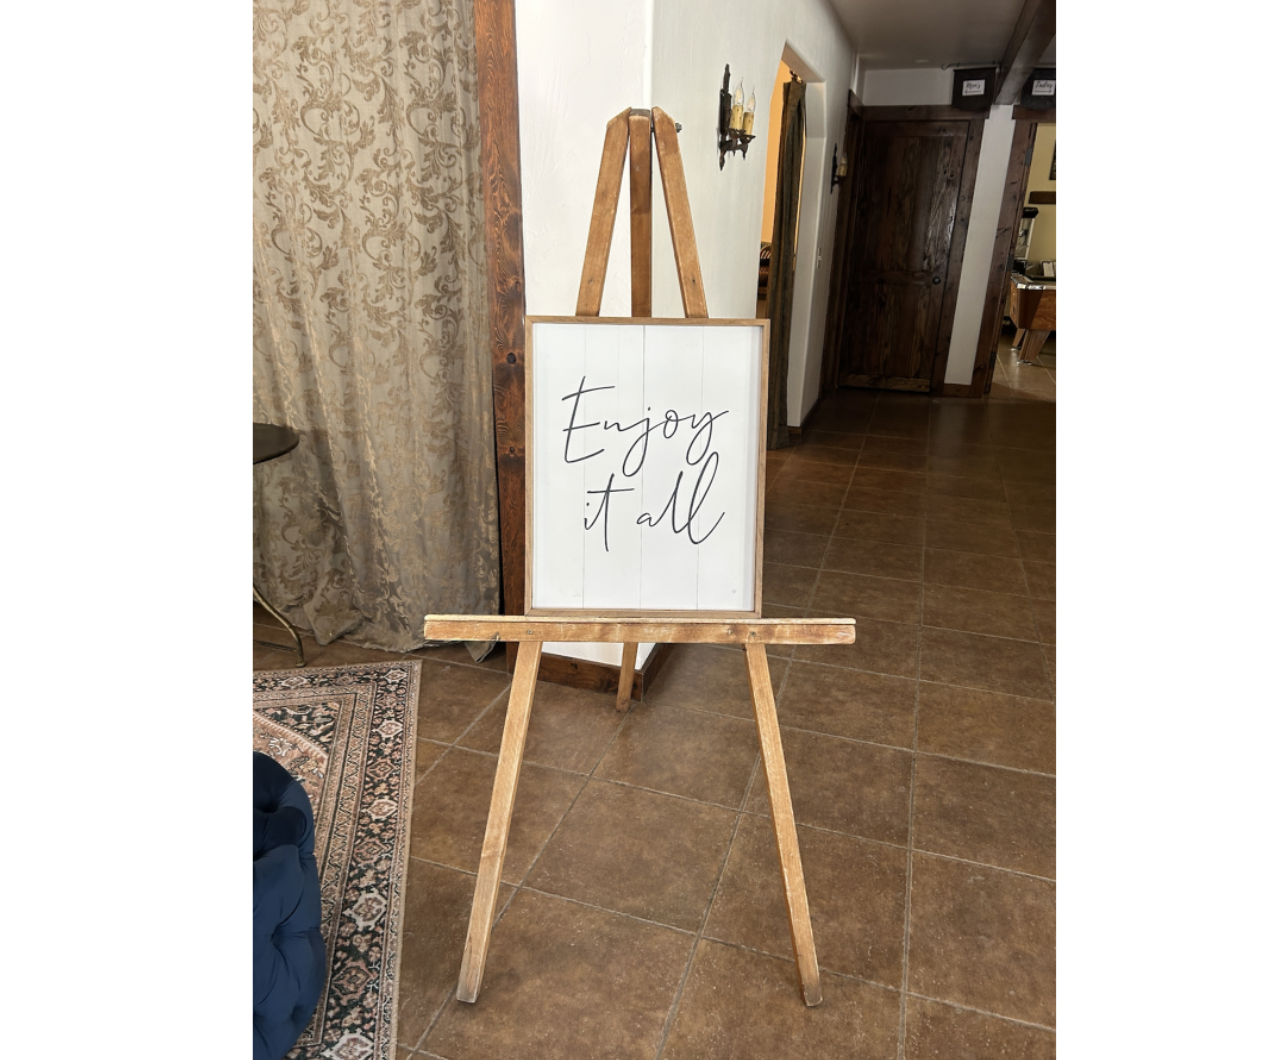 42″ Green Wire Easel